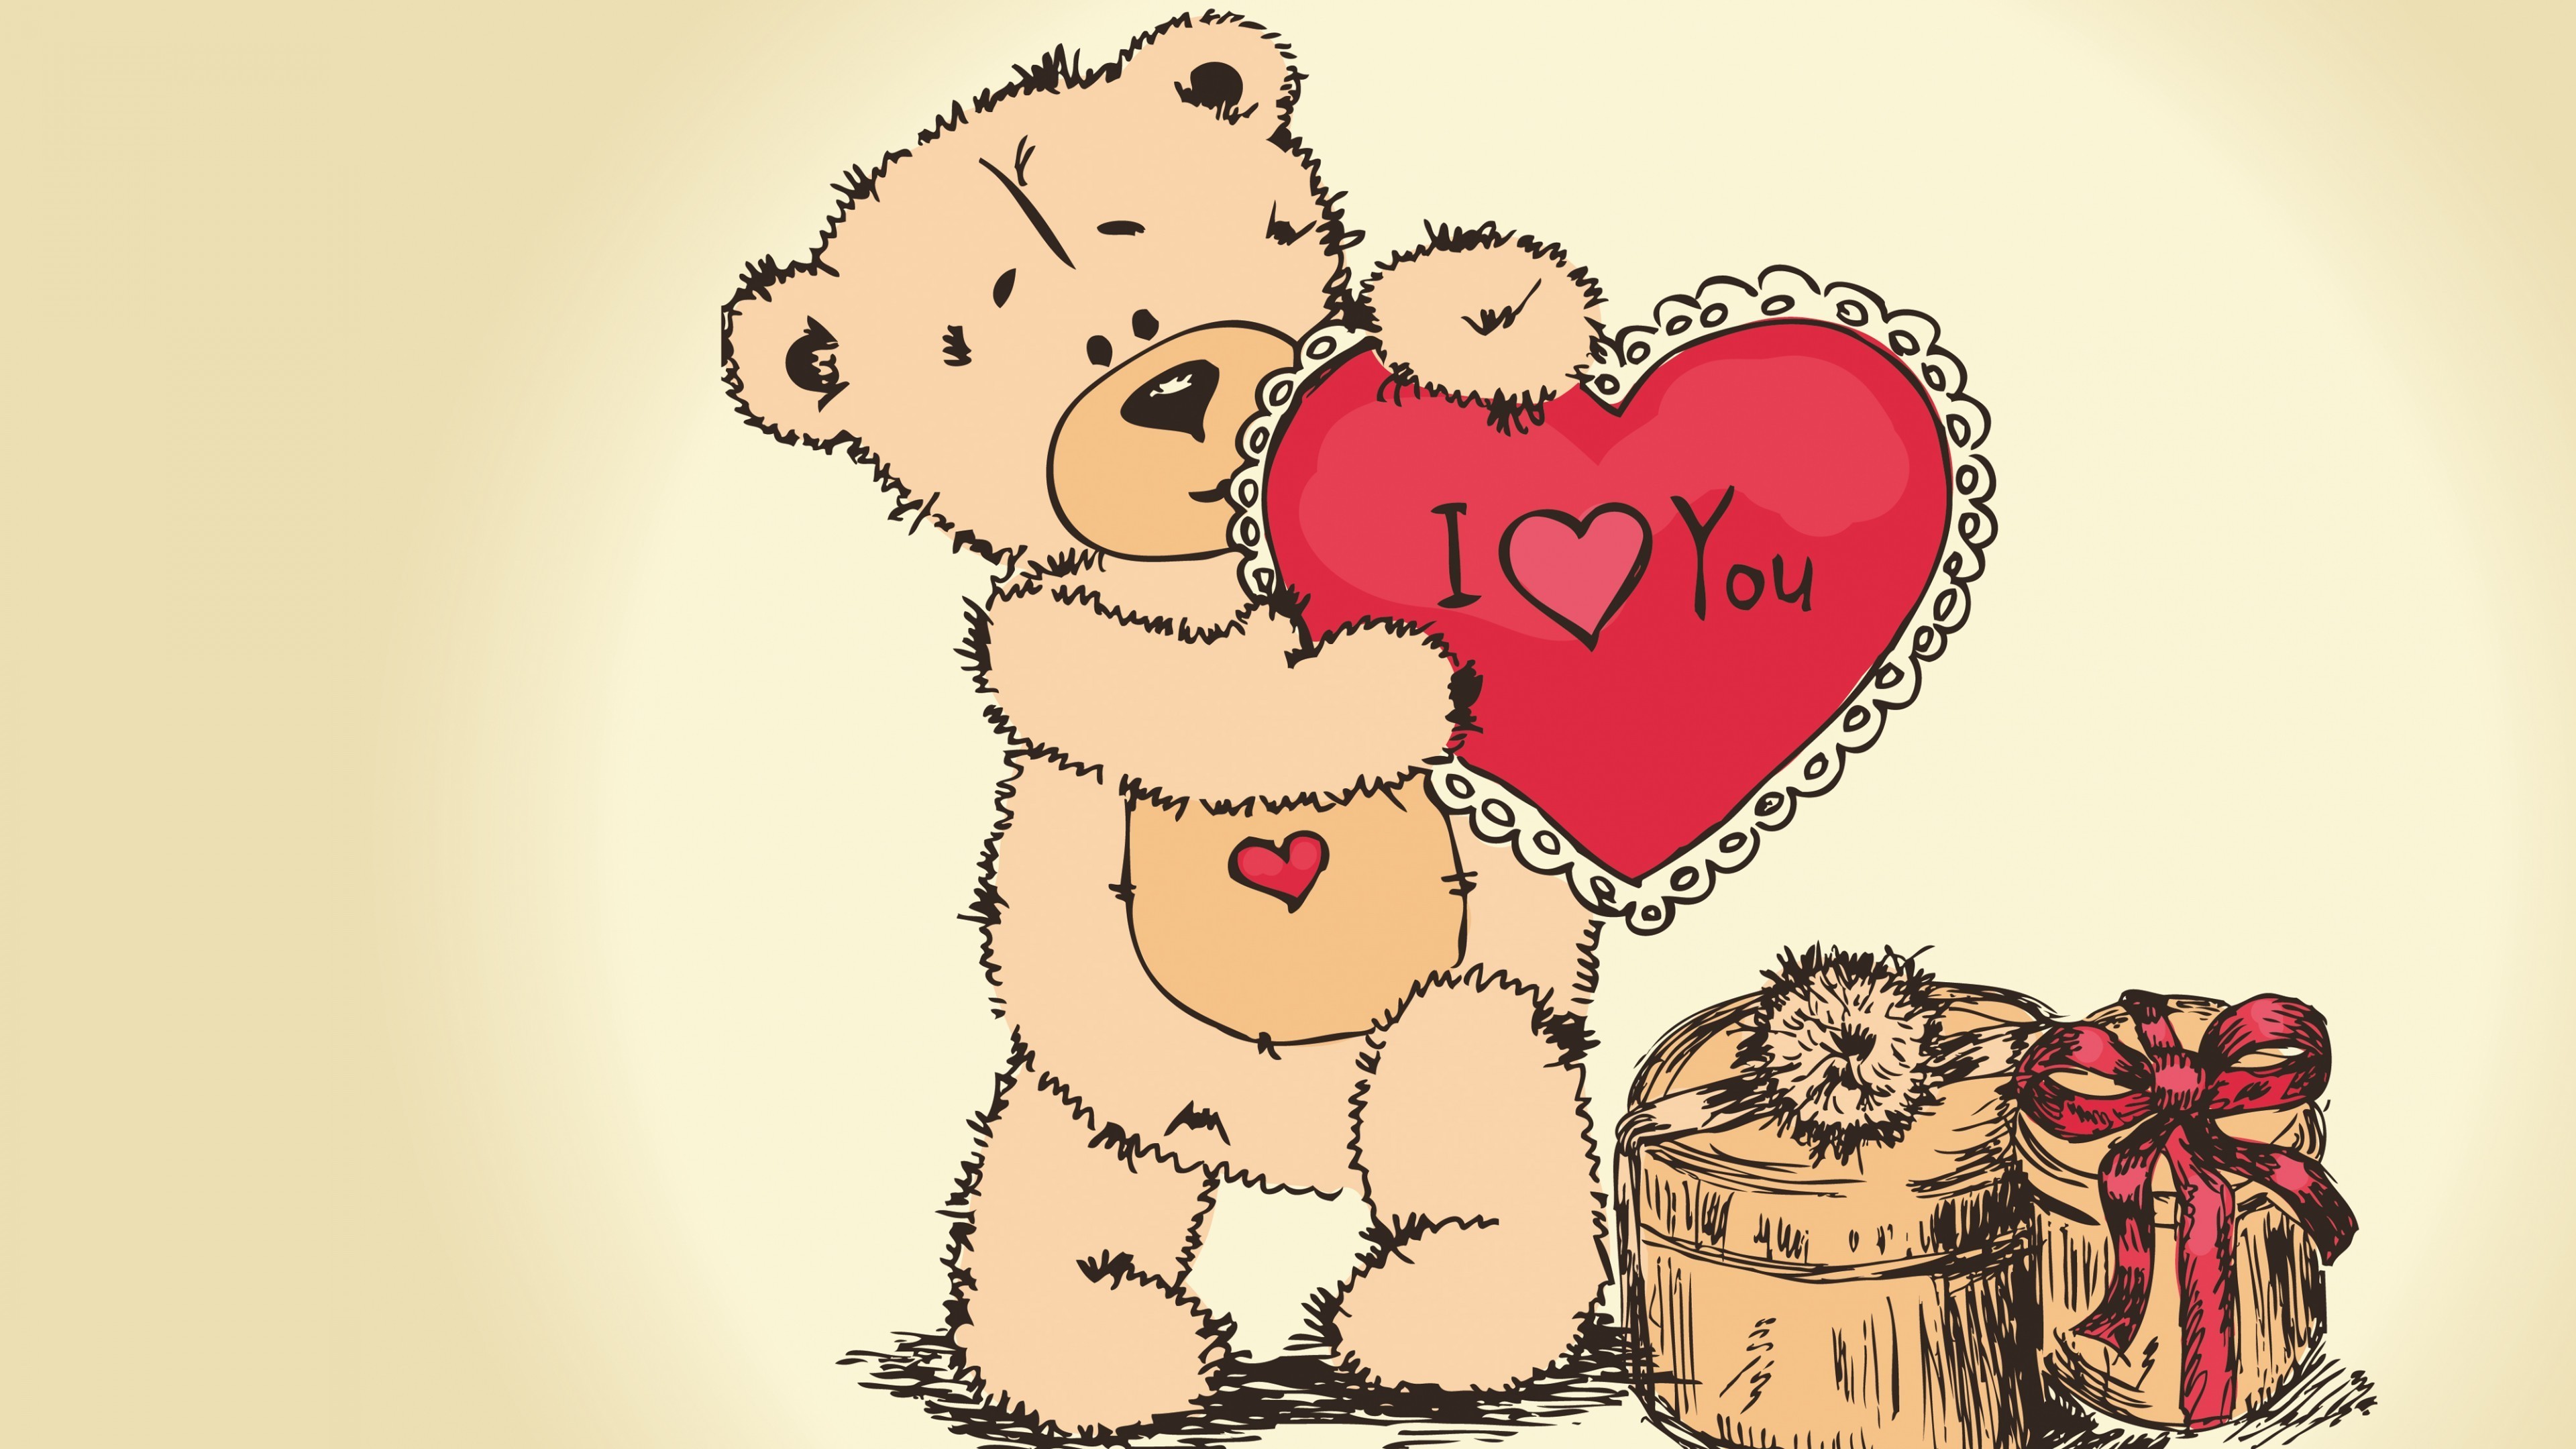 3840x2160 1920x1200 1920x1200 I Love You pics for wife I Love You wallpapers .